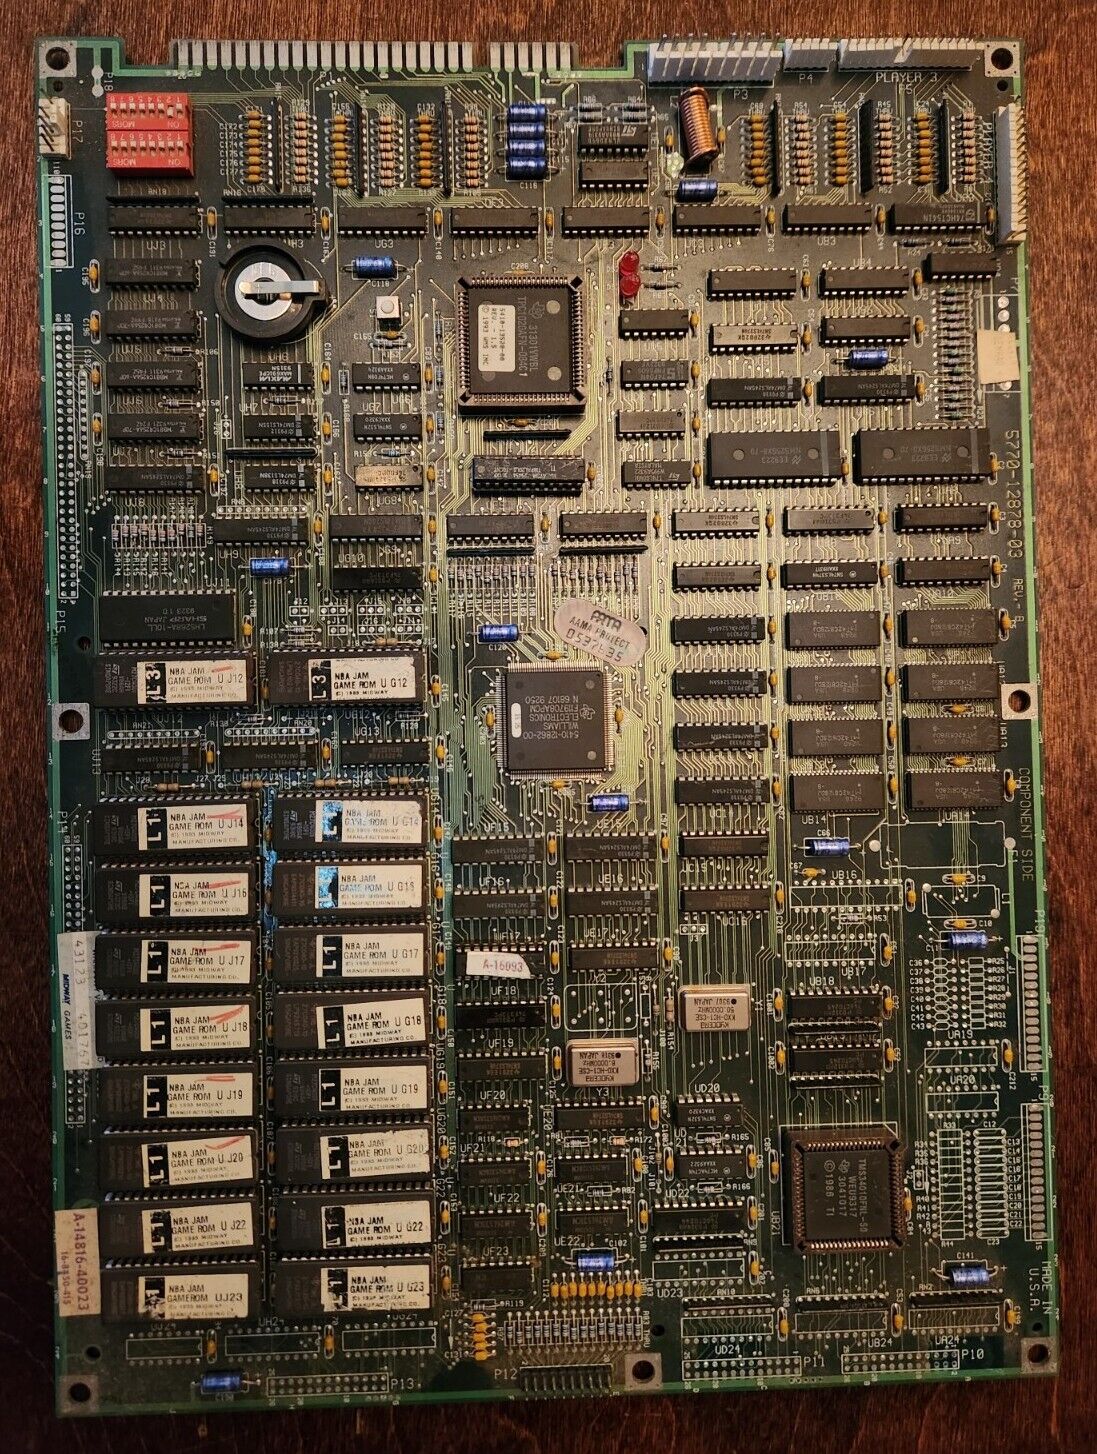 Midway NBA JAM arcade PCB JAMMA game board For Parts Not Working SOLD AS IS